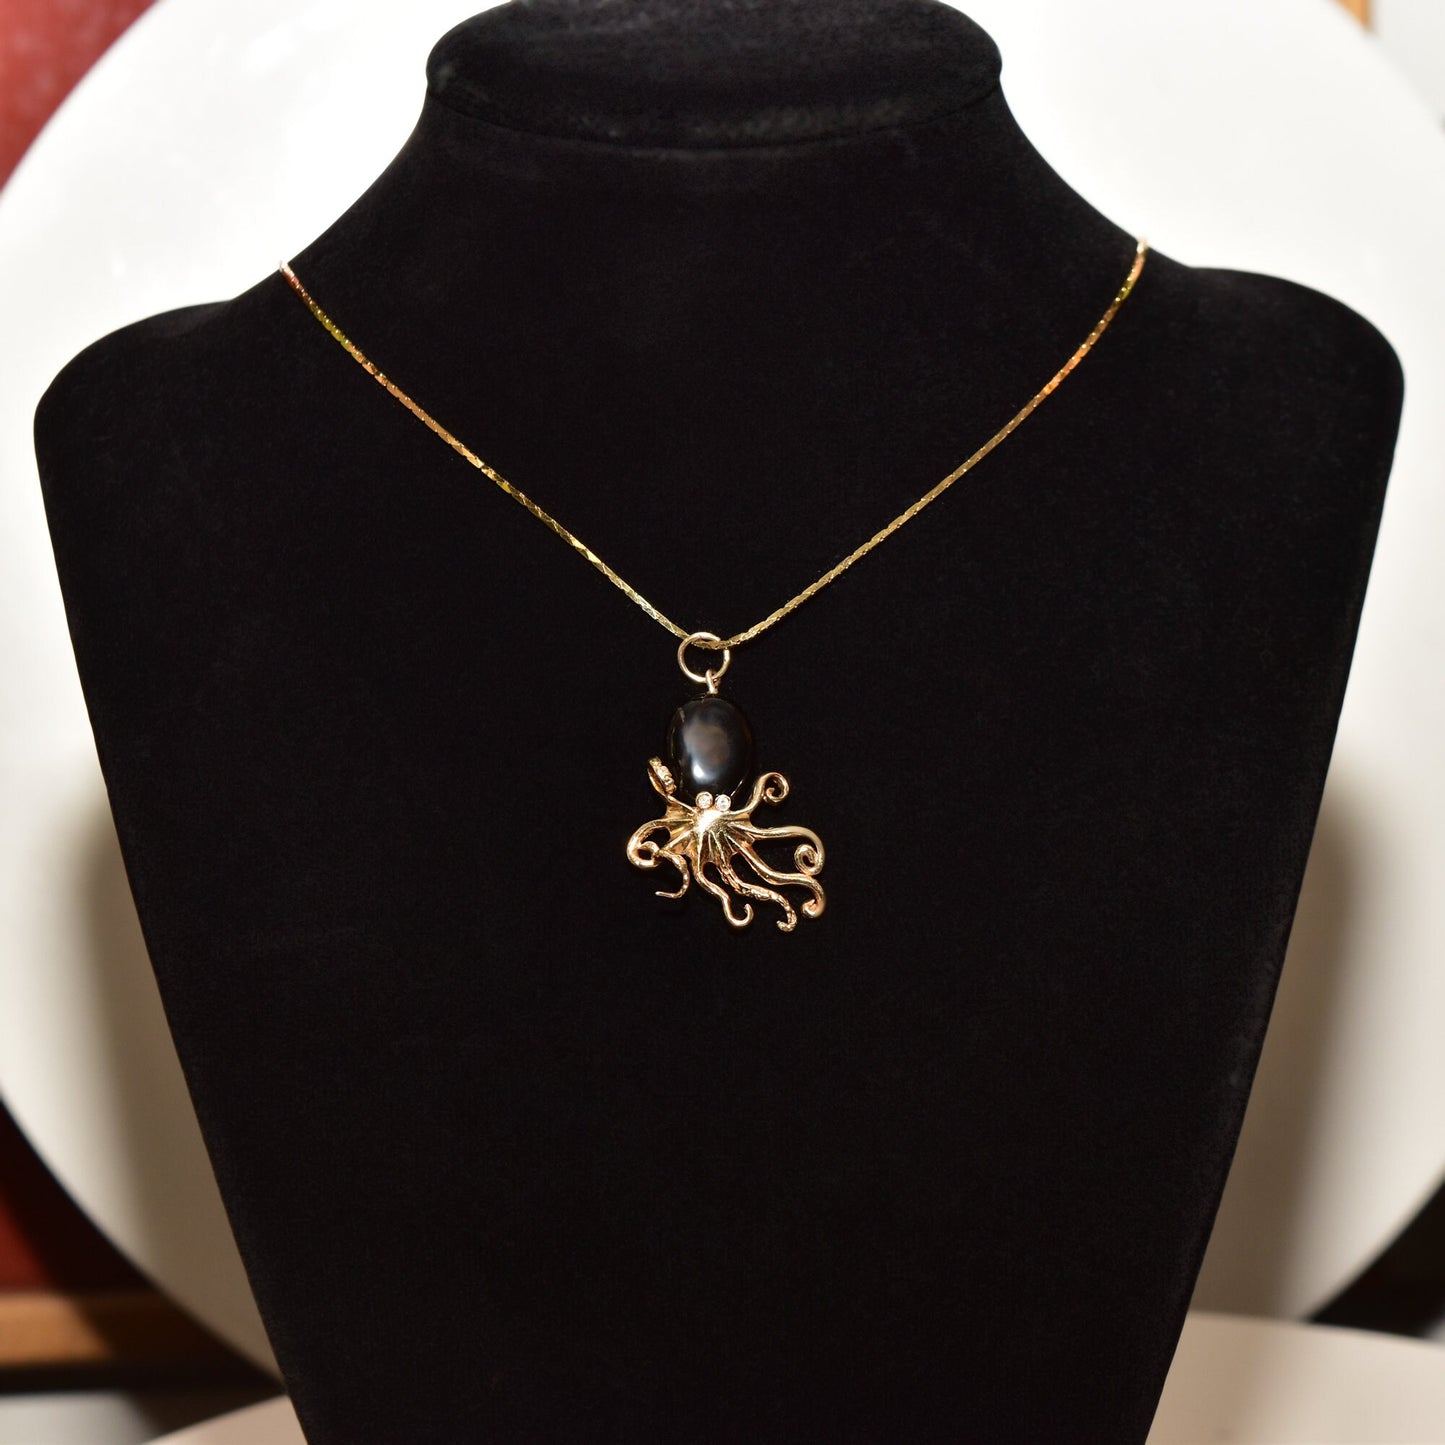 10K yellow gold octopus pendant necklace with black coral body and diamond eye, displayed on black velvet jewelry stand.